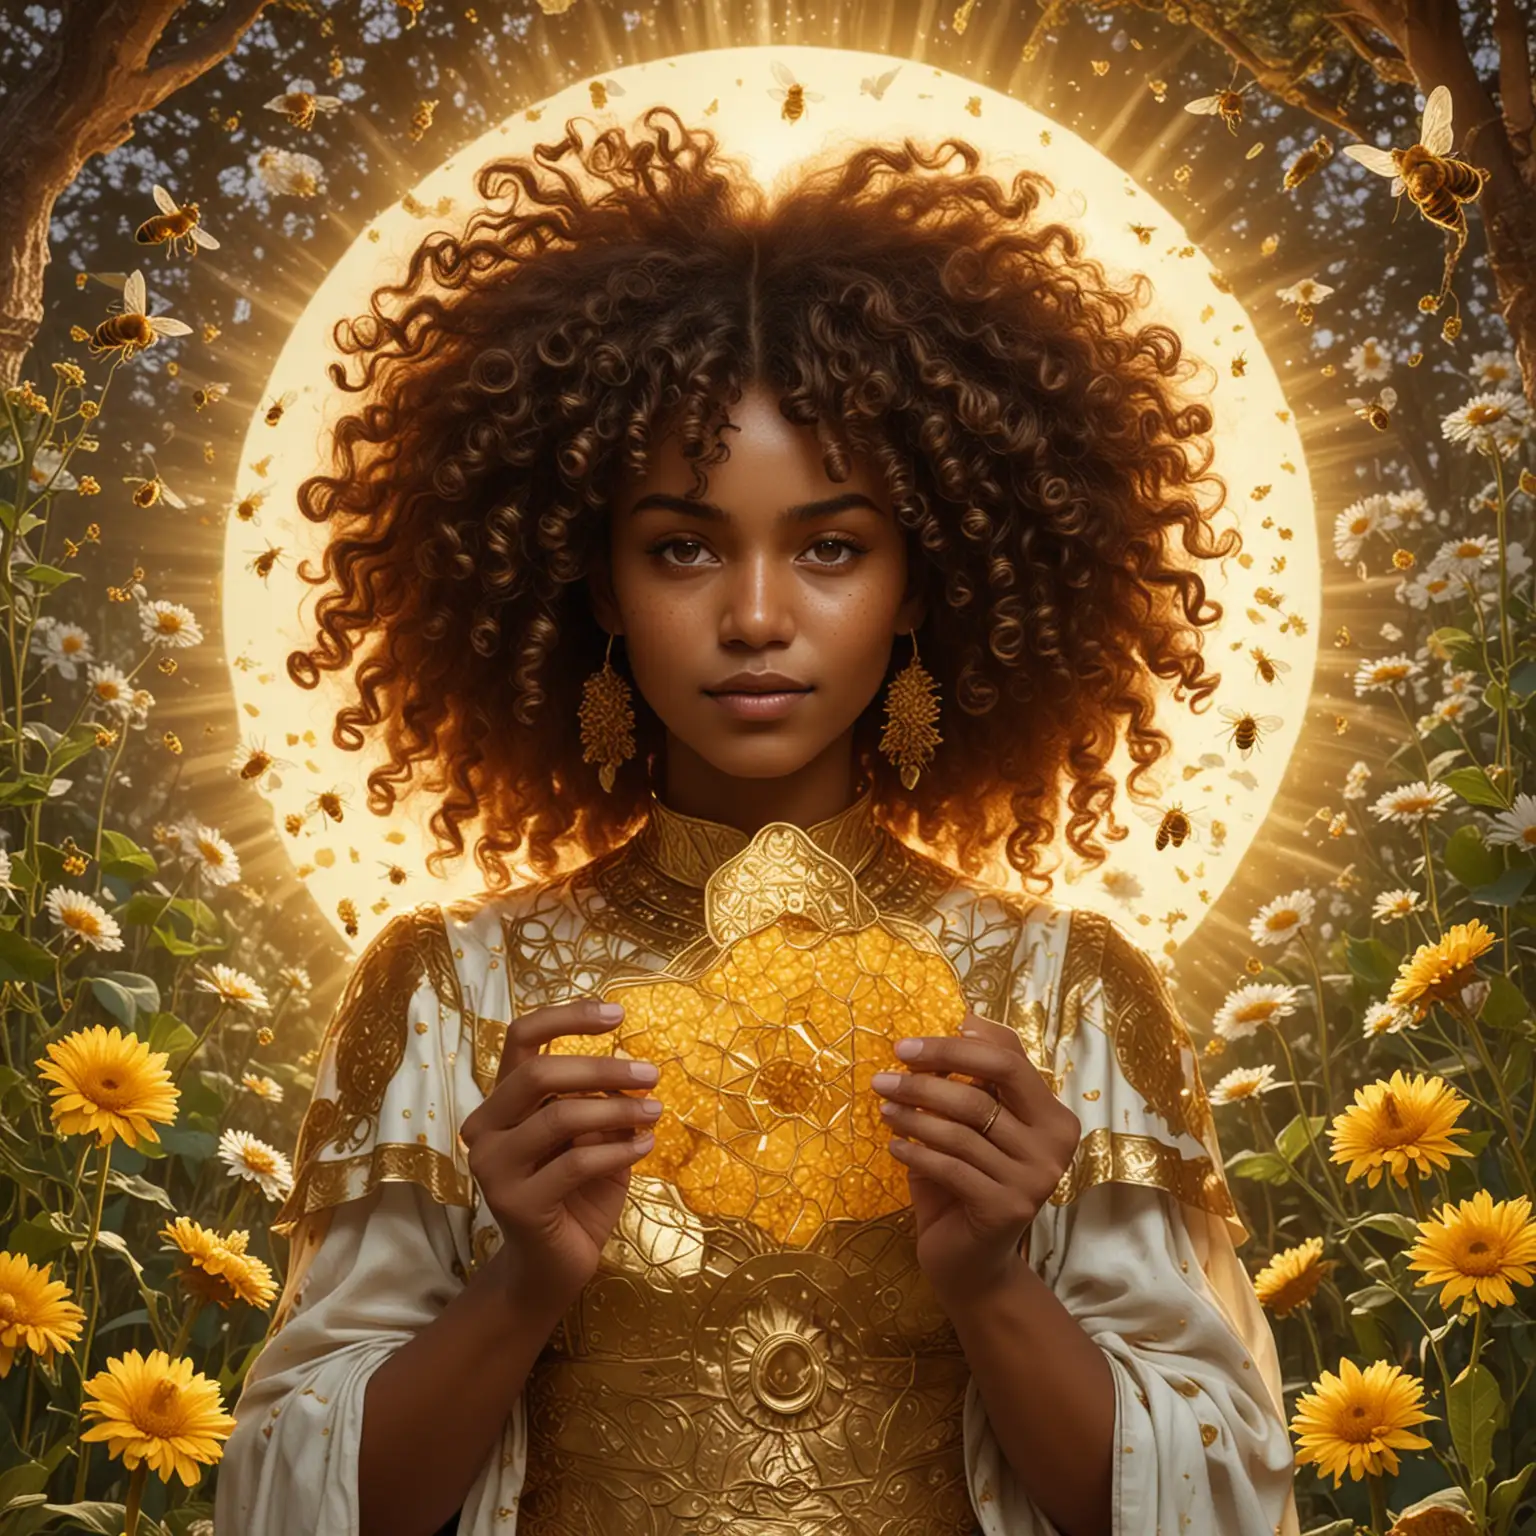 AfroIndigenous Woman in Enchanted Garden Eating Honeycomb in Sunlight